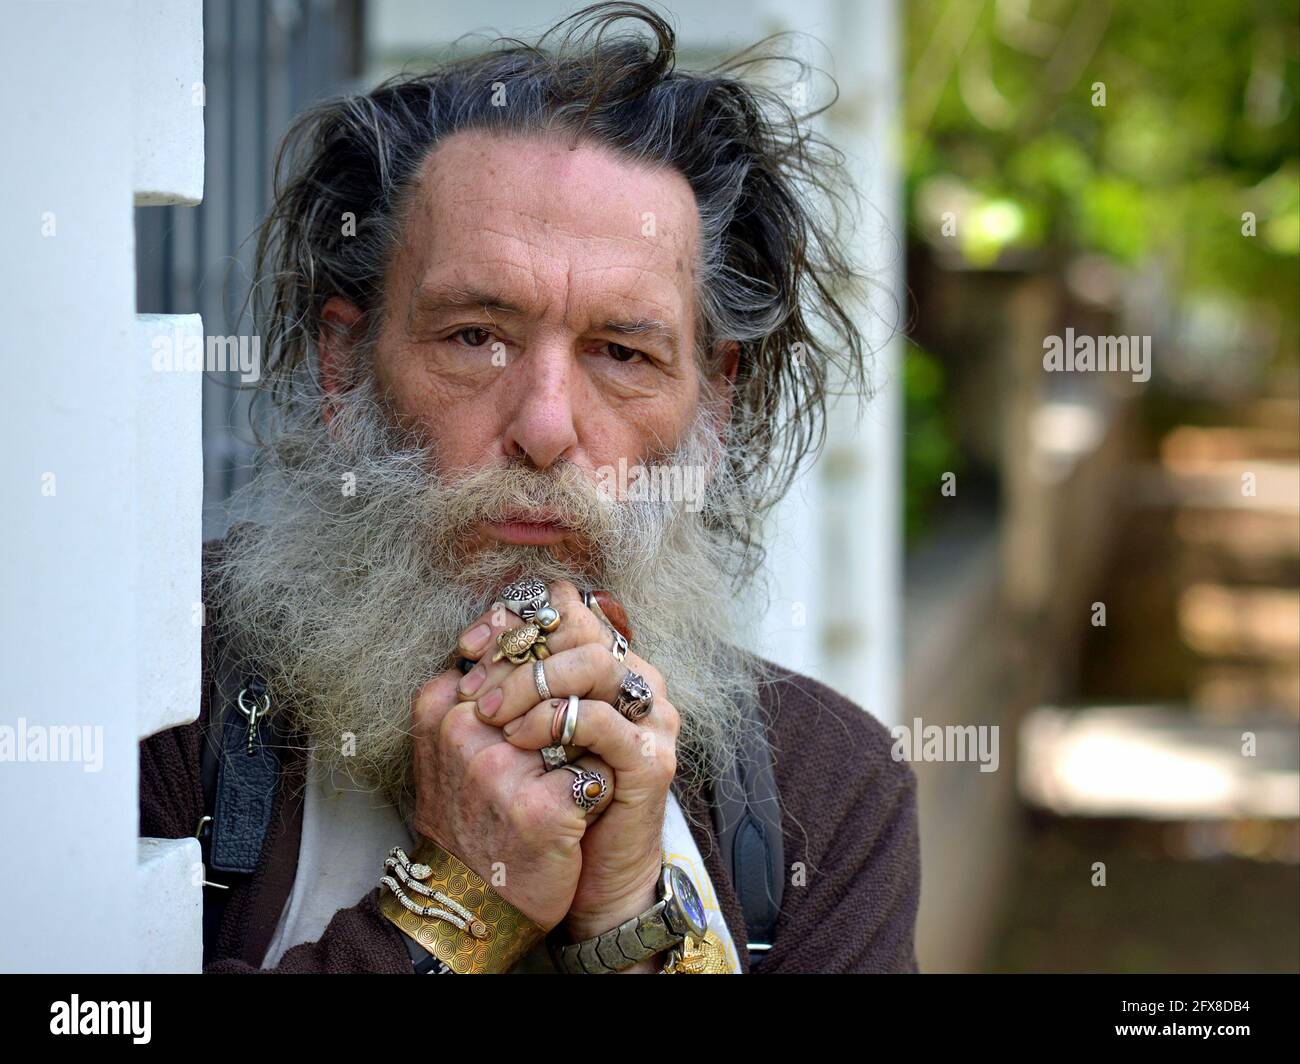 Old spiritual Caucasian wise man with thick beard and disheveled hair poses for the camera, clasps his hands and shows his many rings and bracelets. Stock Photo